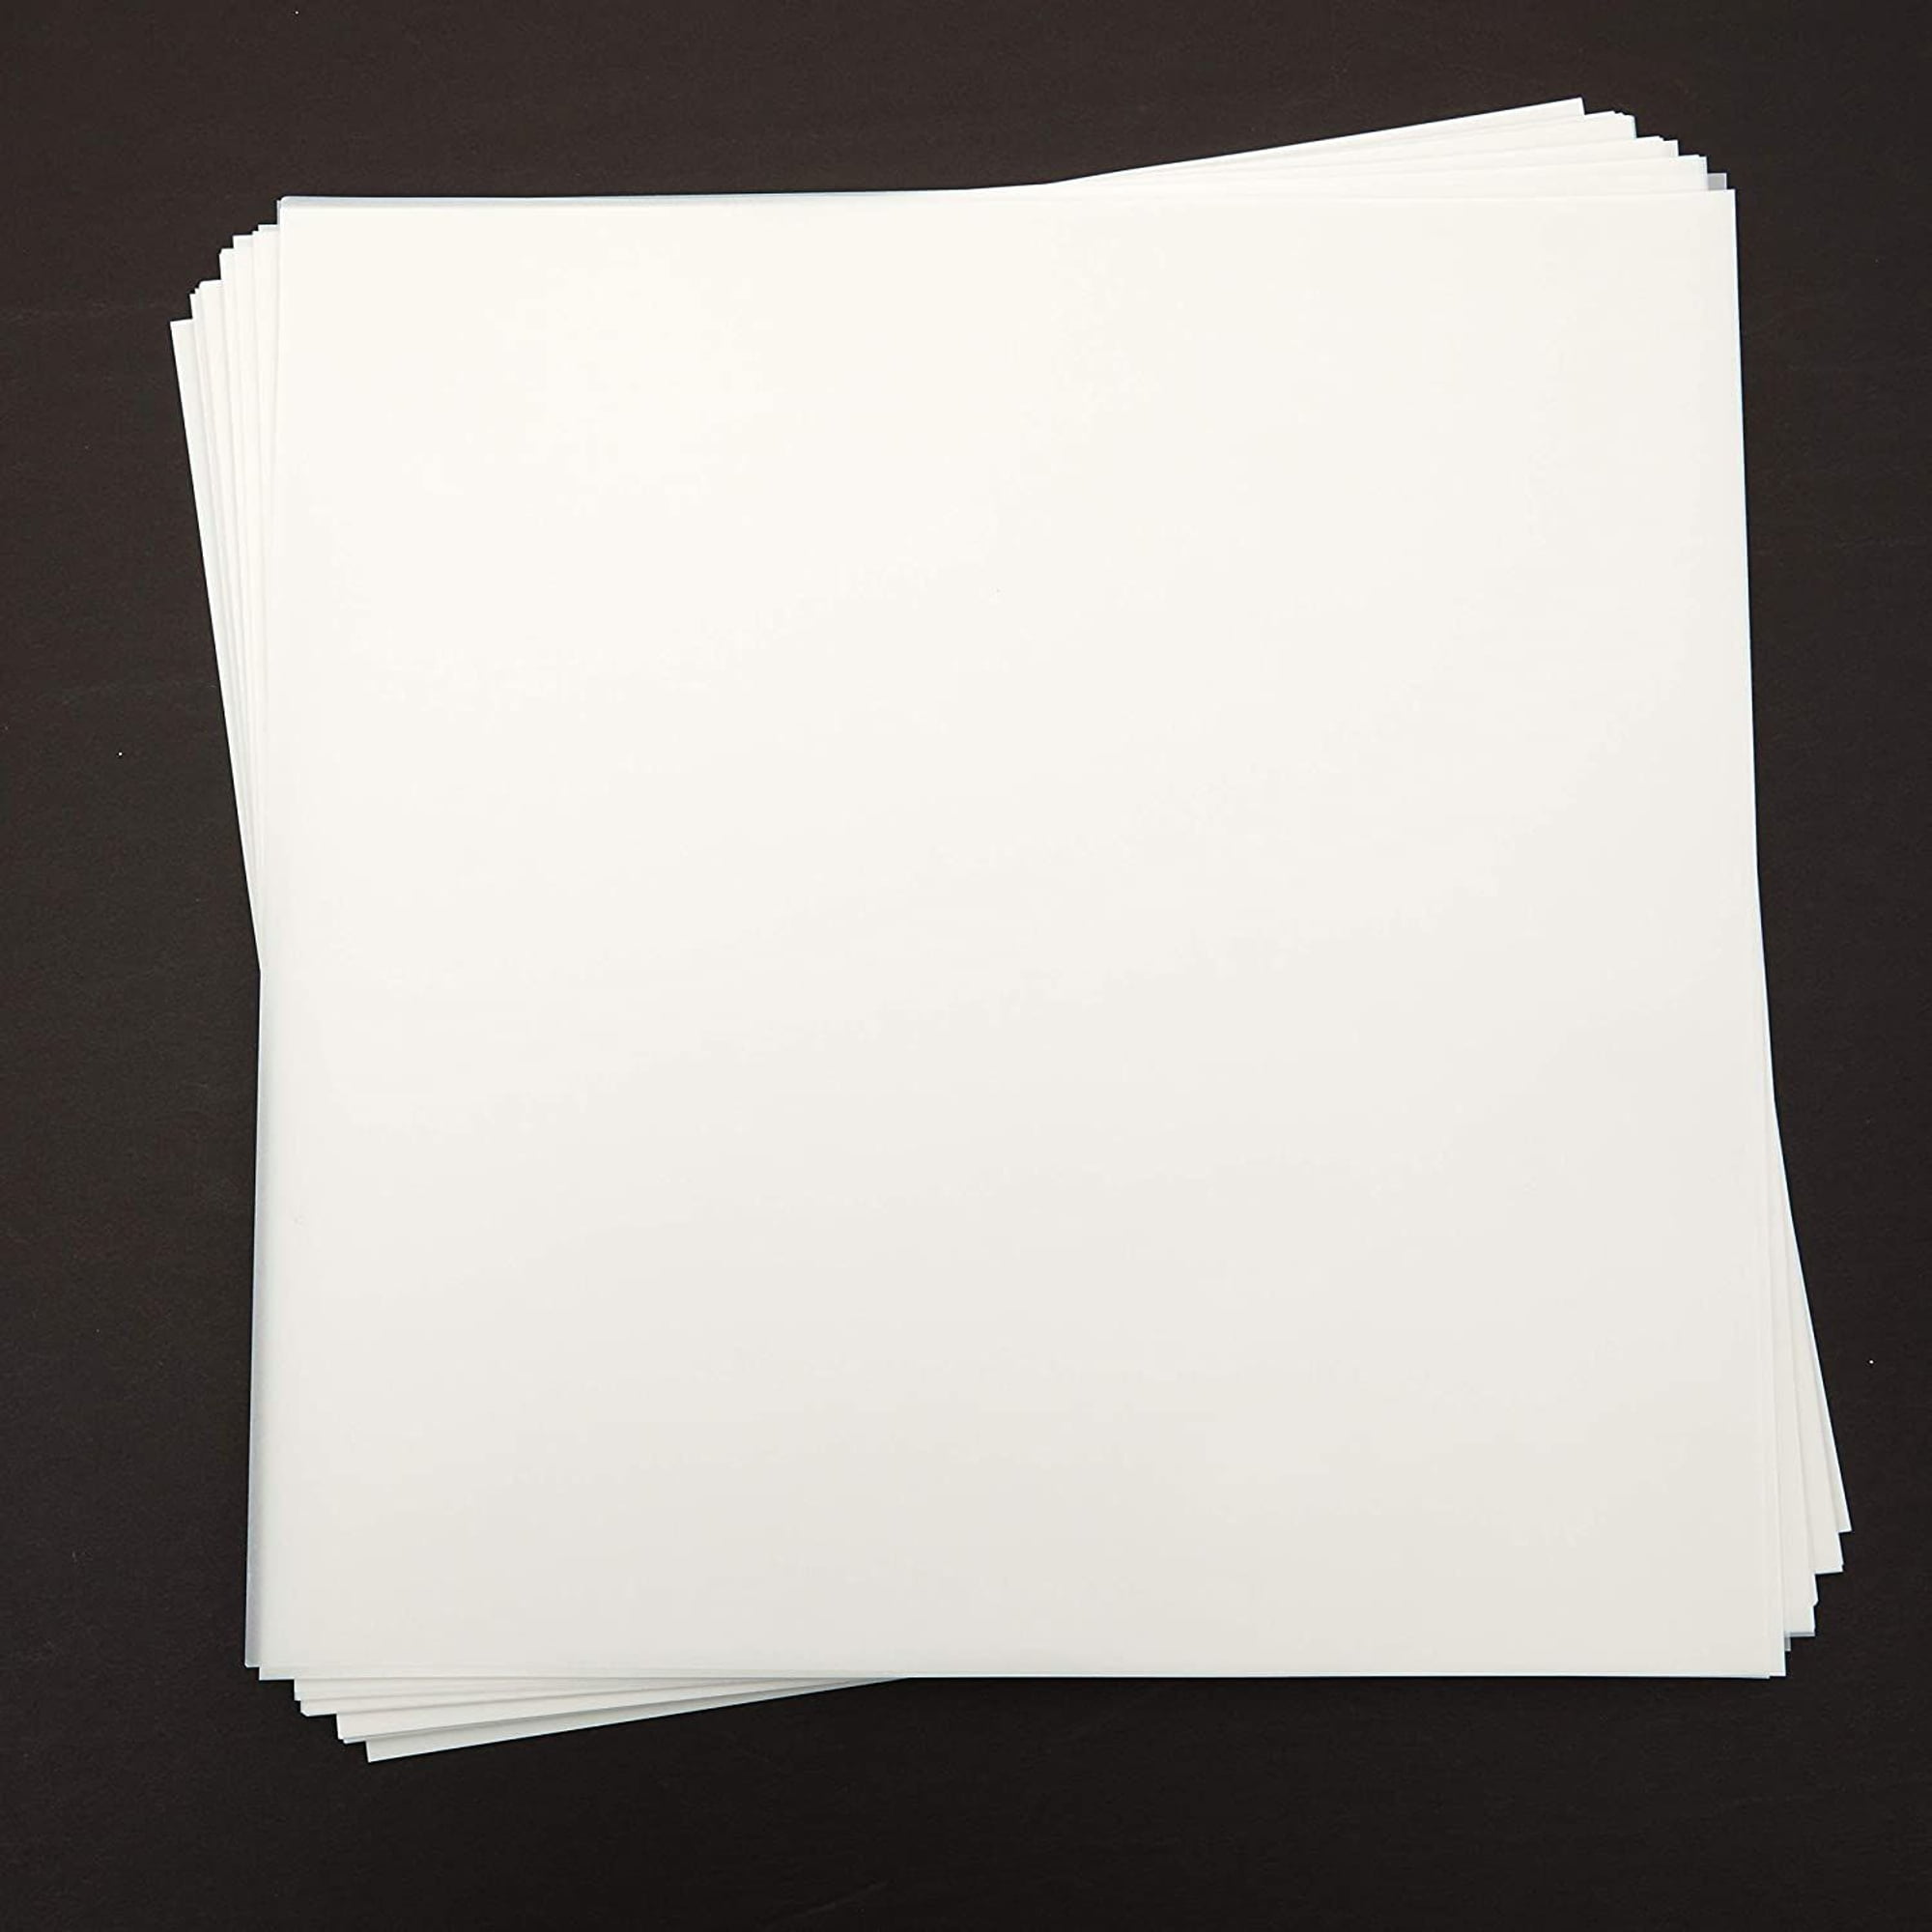 Translucent Vellum Paper, Printable for Invitations (8.5 x 11 in 100 Sheets),  PACK - King Soopers